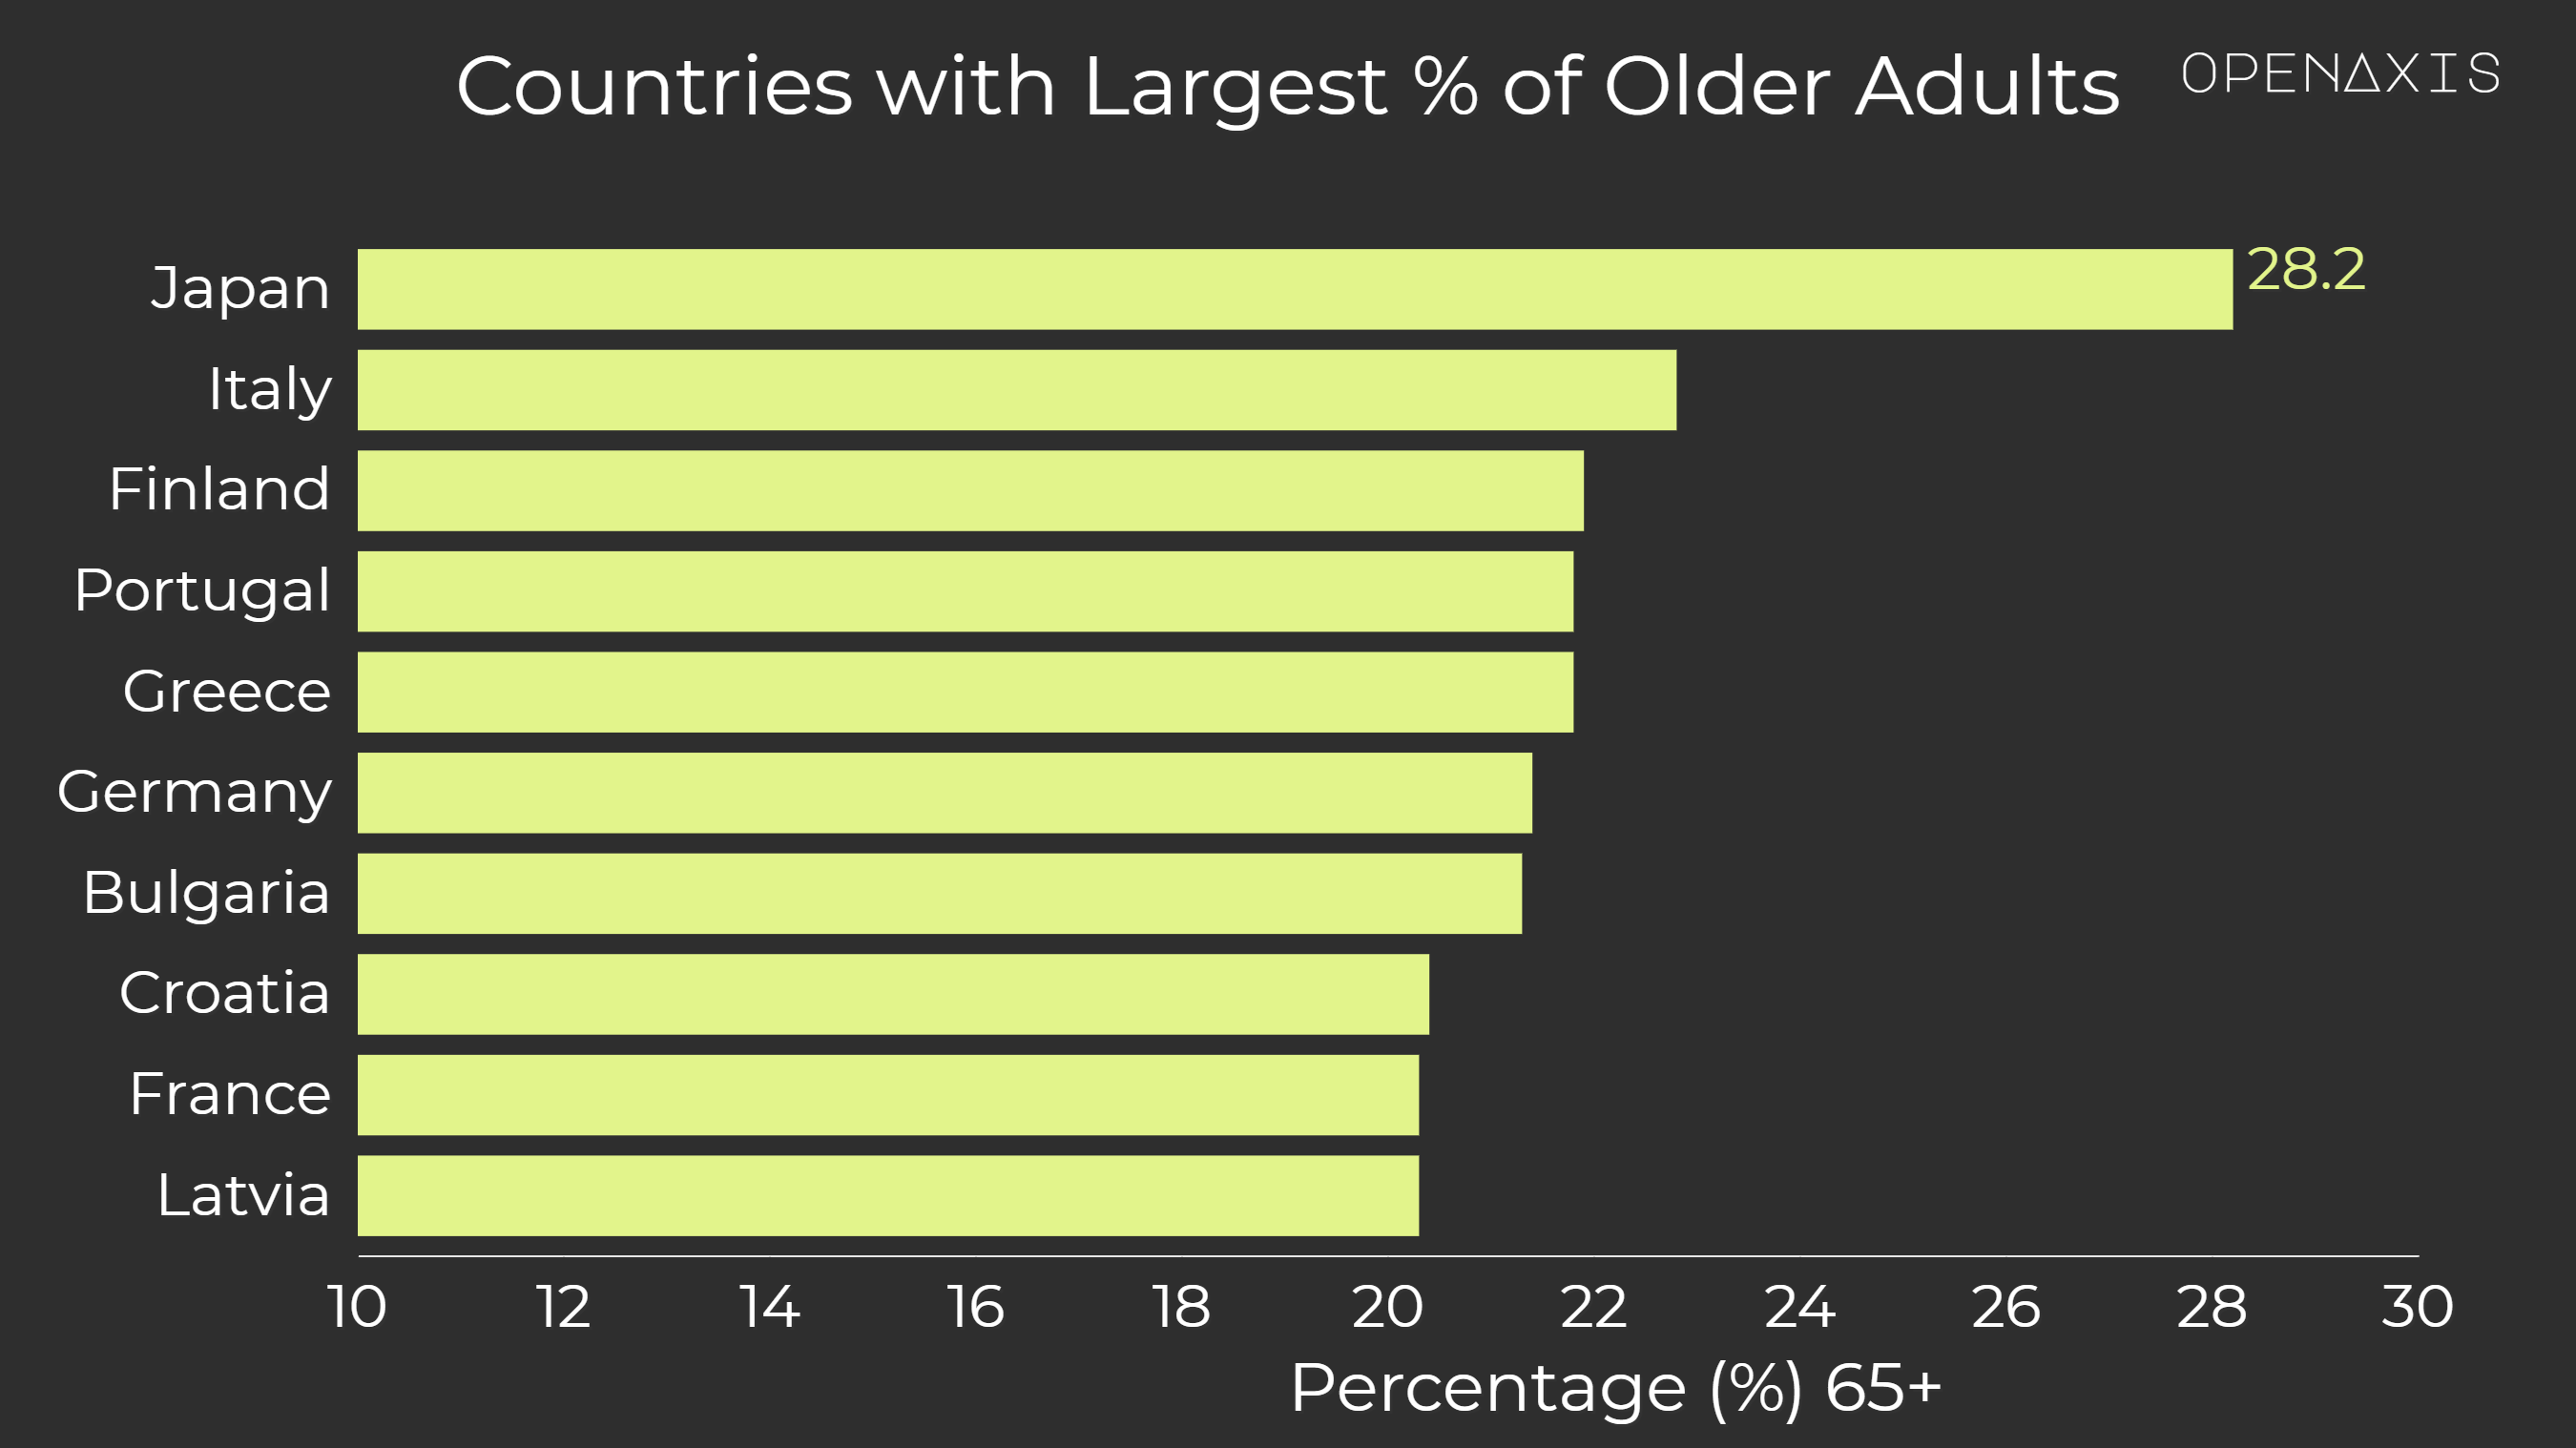 "Countries with Largest % of Older Adults"